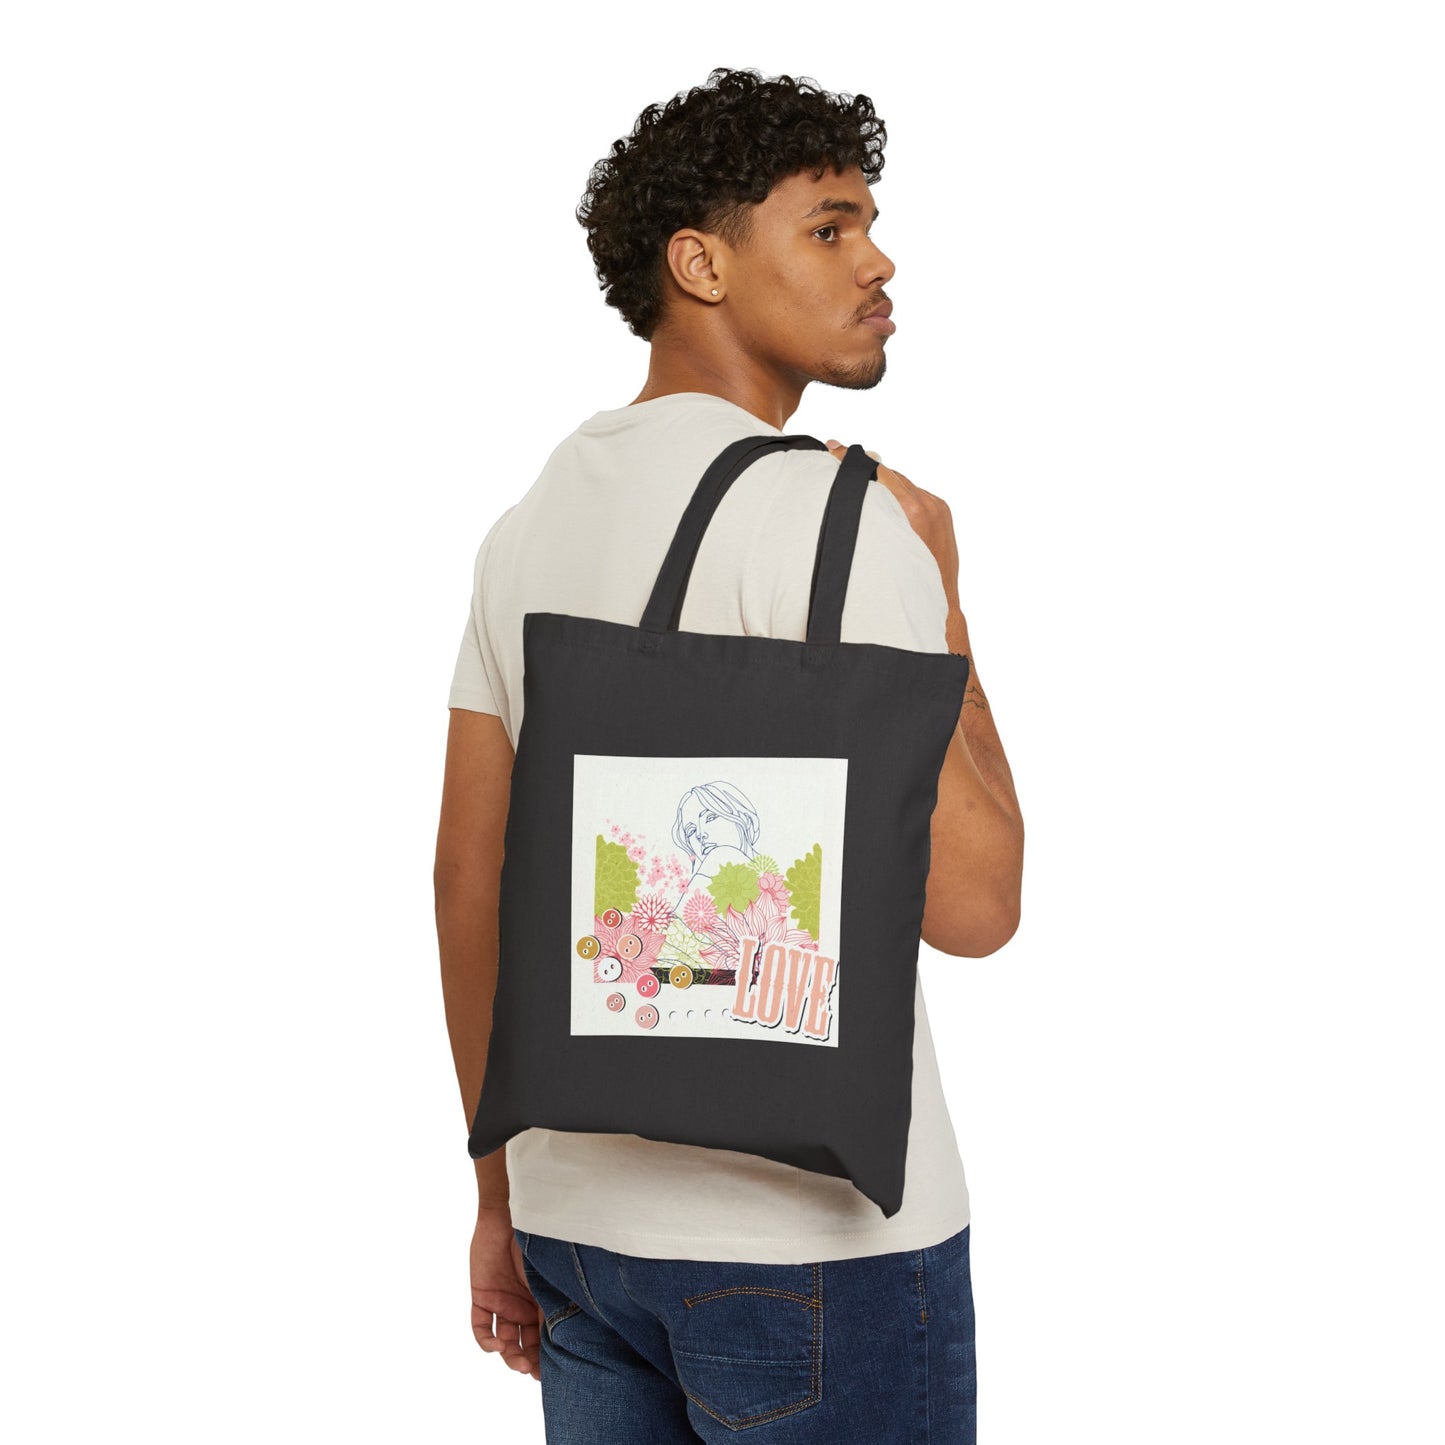 Tote Bag - Girl In Picture